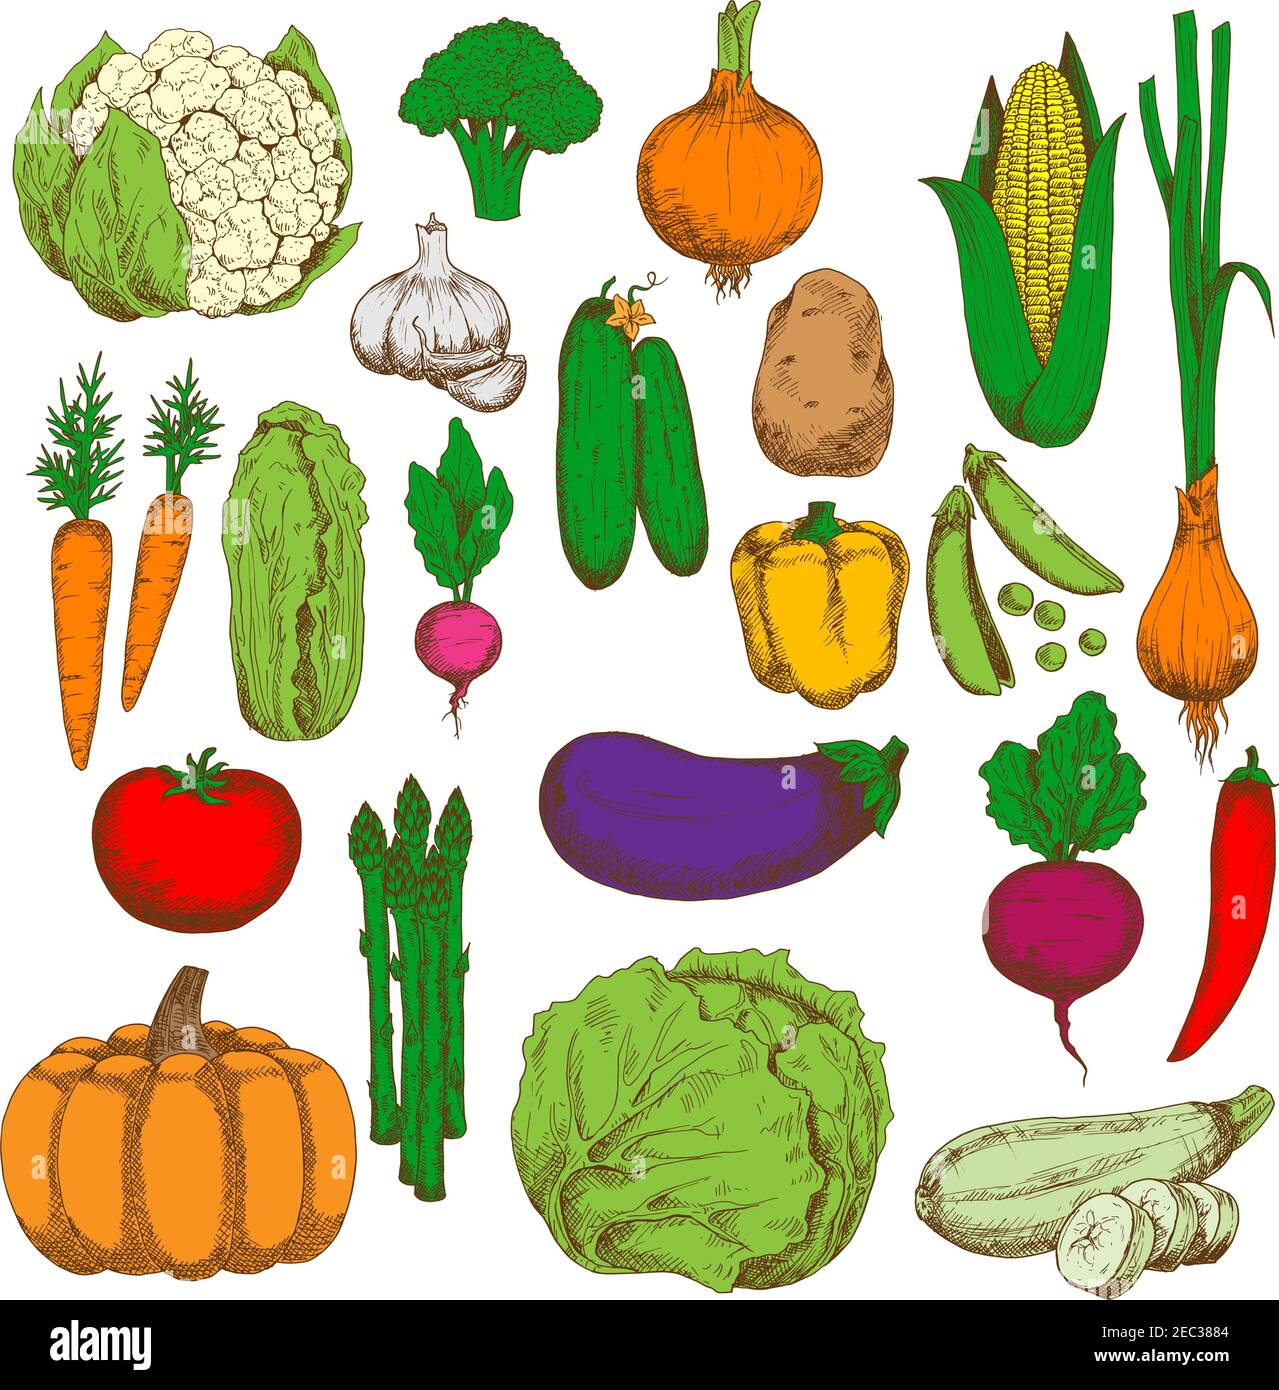 Green crunchy cabbages, cucumbers, cauliflower and asparagus, sweet corn, pumpkin, carrots and beet, ripe tomato, potato, eggplant and zucchini, juicy Stock Vector